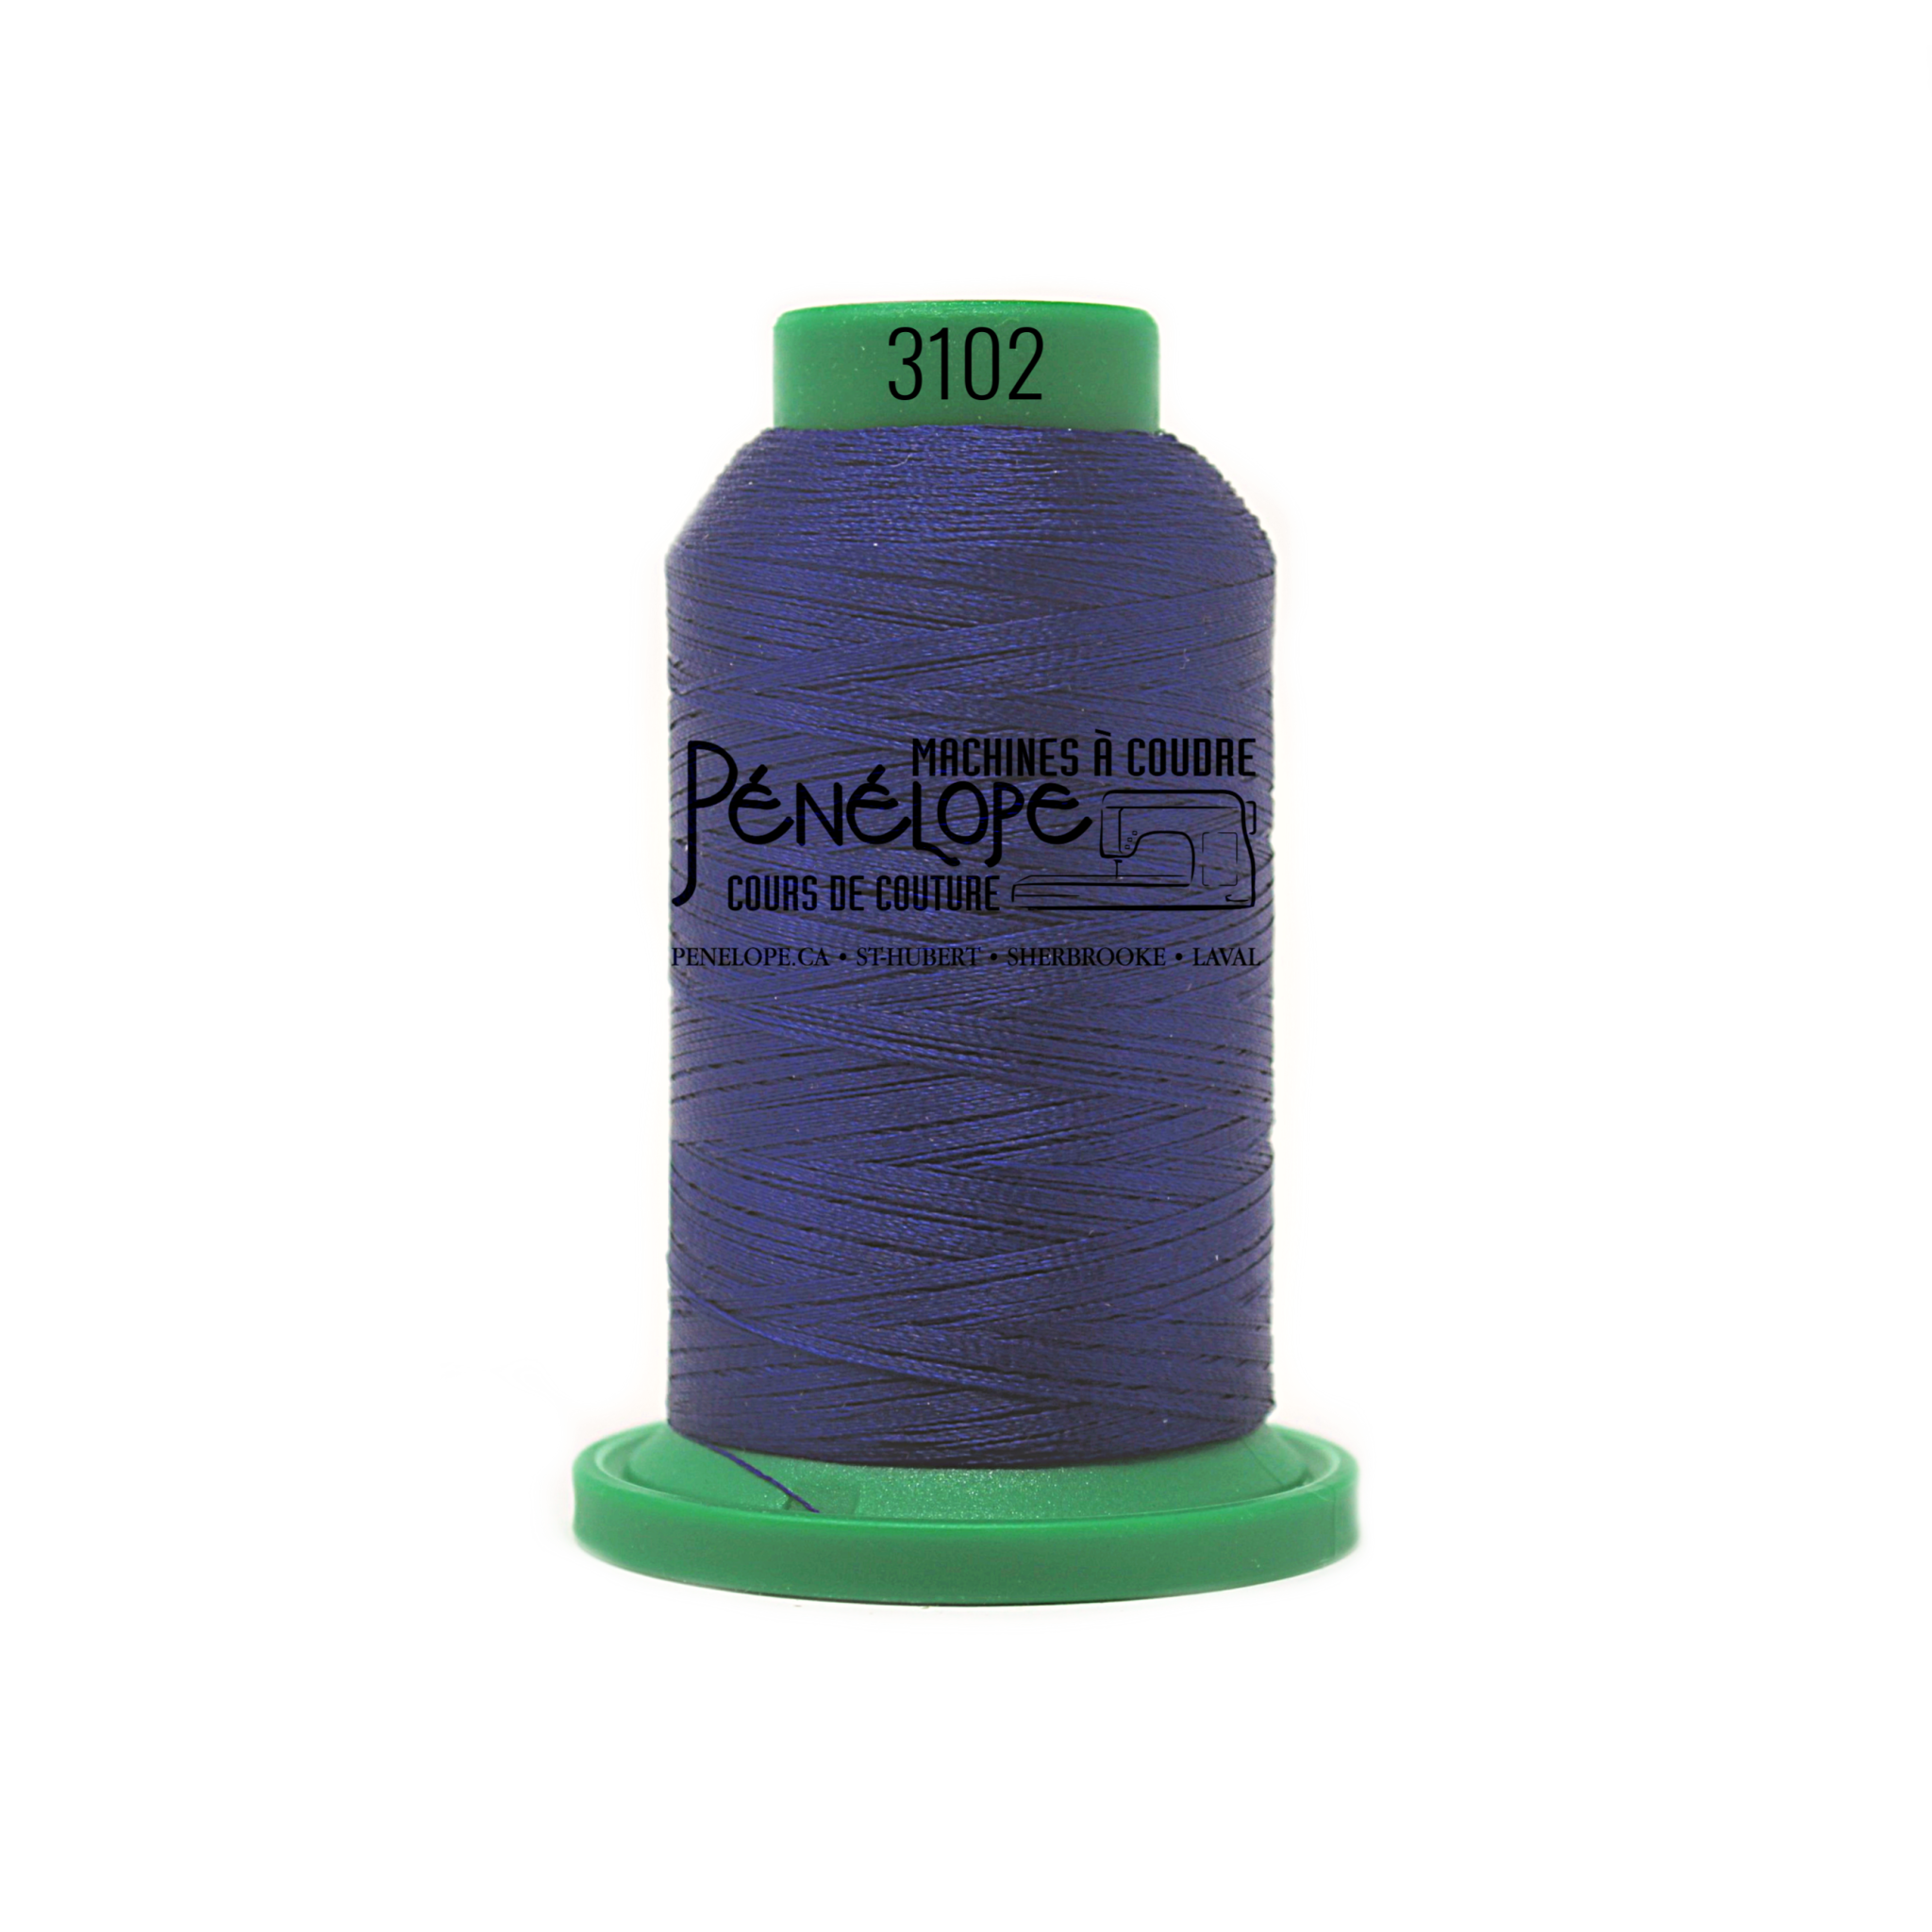 Isacord Isacord sewing and embroidery thread 3102